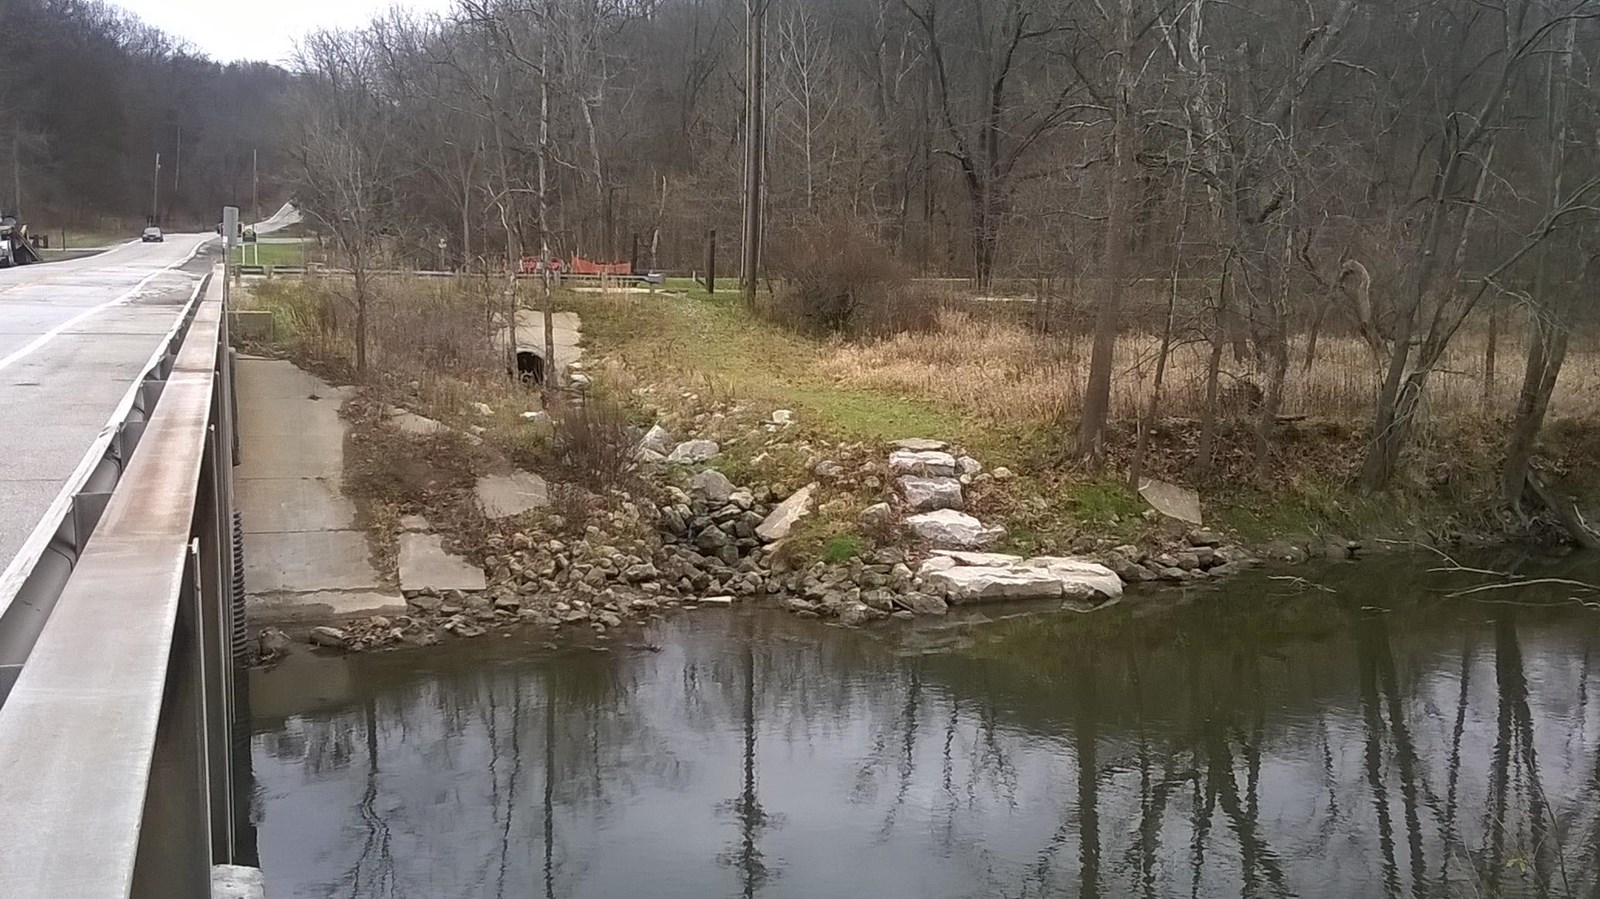 Next to a bridge is a thin, grassy trail that leads down to the Cuyahoga River